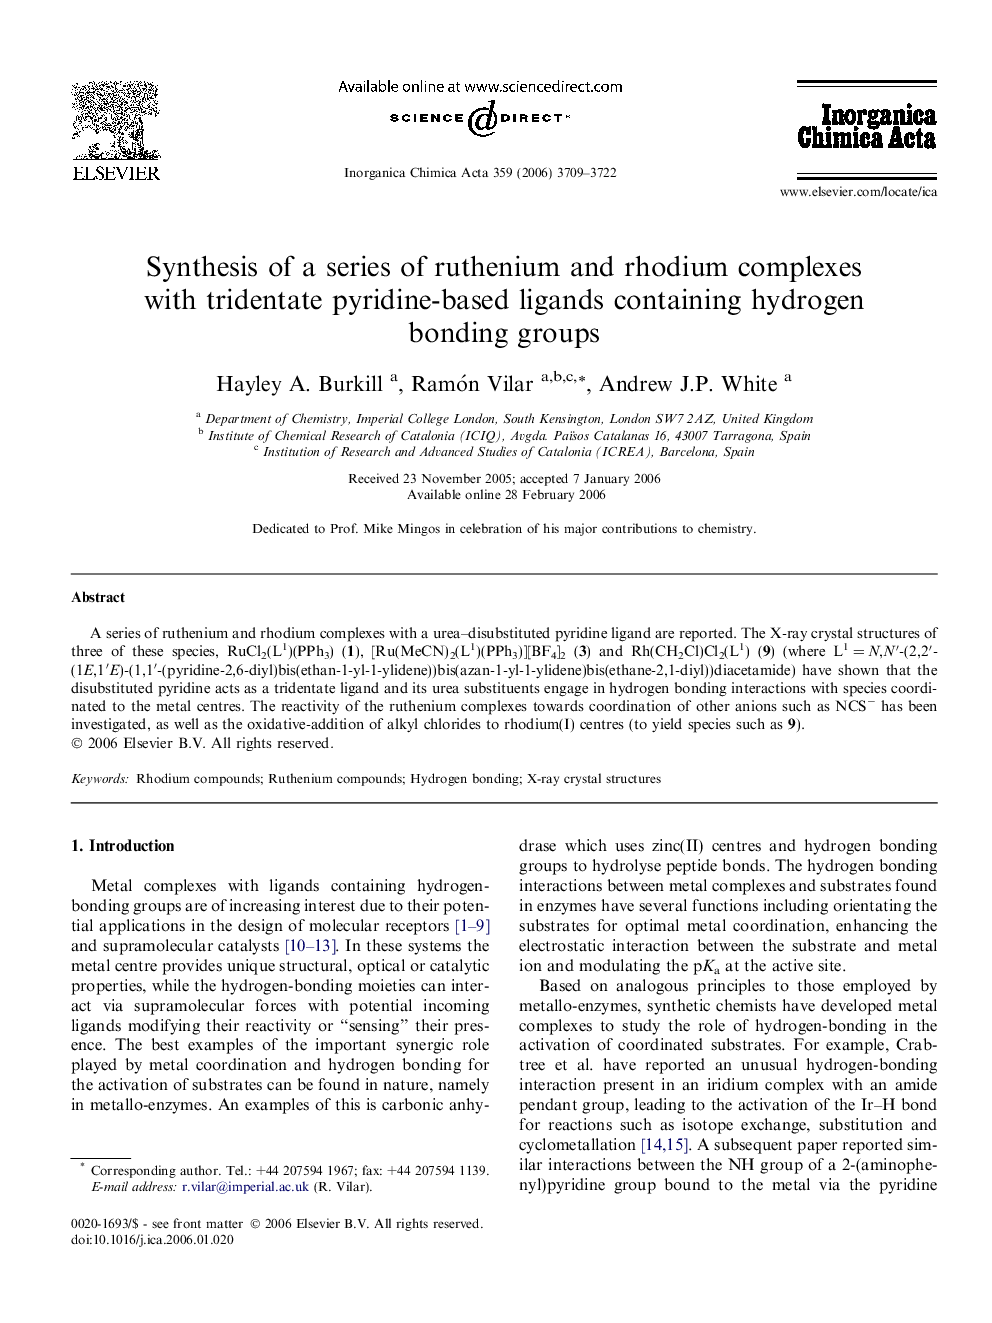 Synthesis of a series of ruthenium and rhodium complexes with tridentate pyridine-based ligands containing hydrogen bonding groups